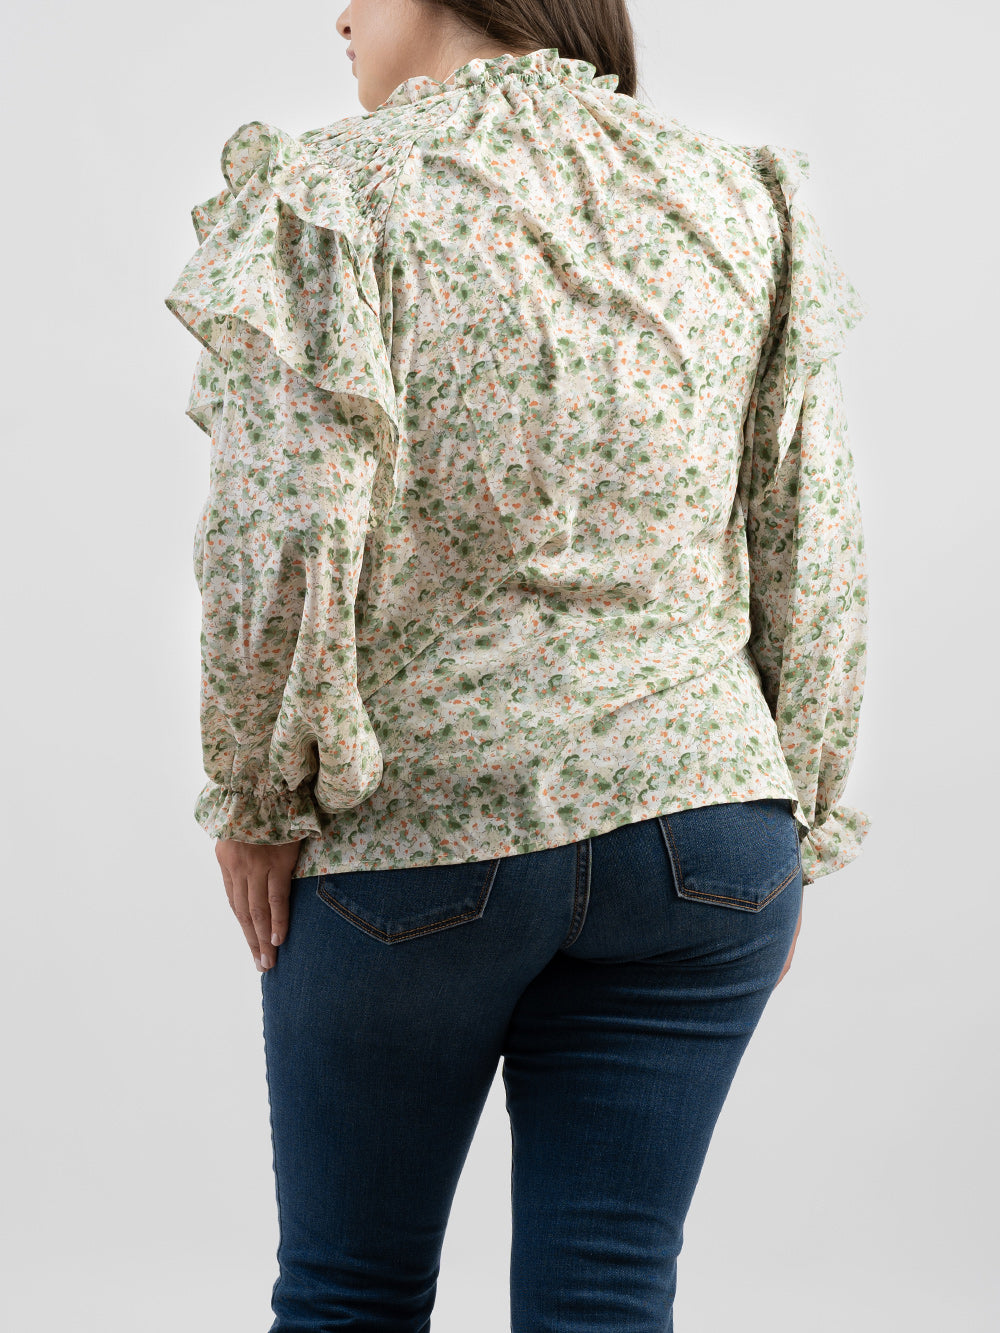 American Bling Plus Size Women Floral Print Tie Shirred Blouse - Montana West World